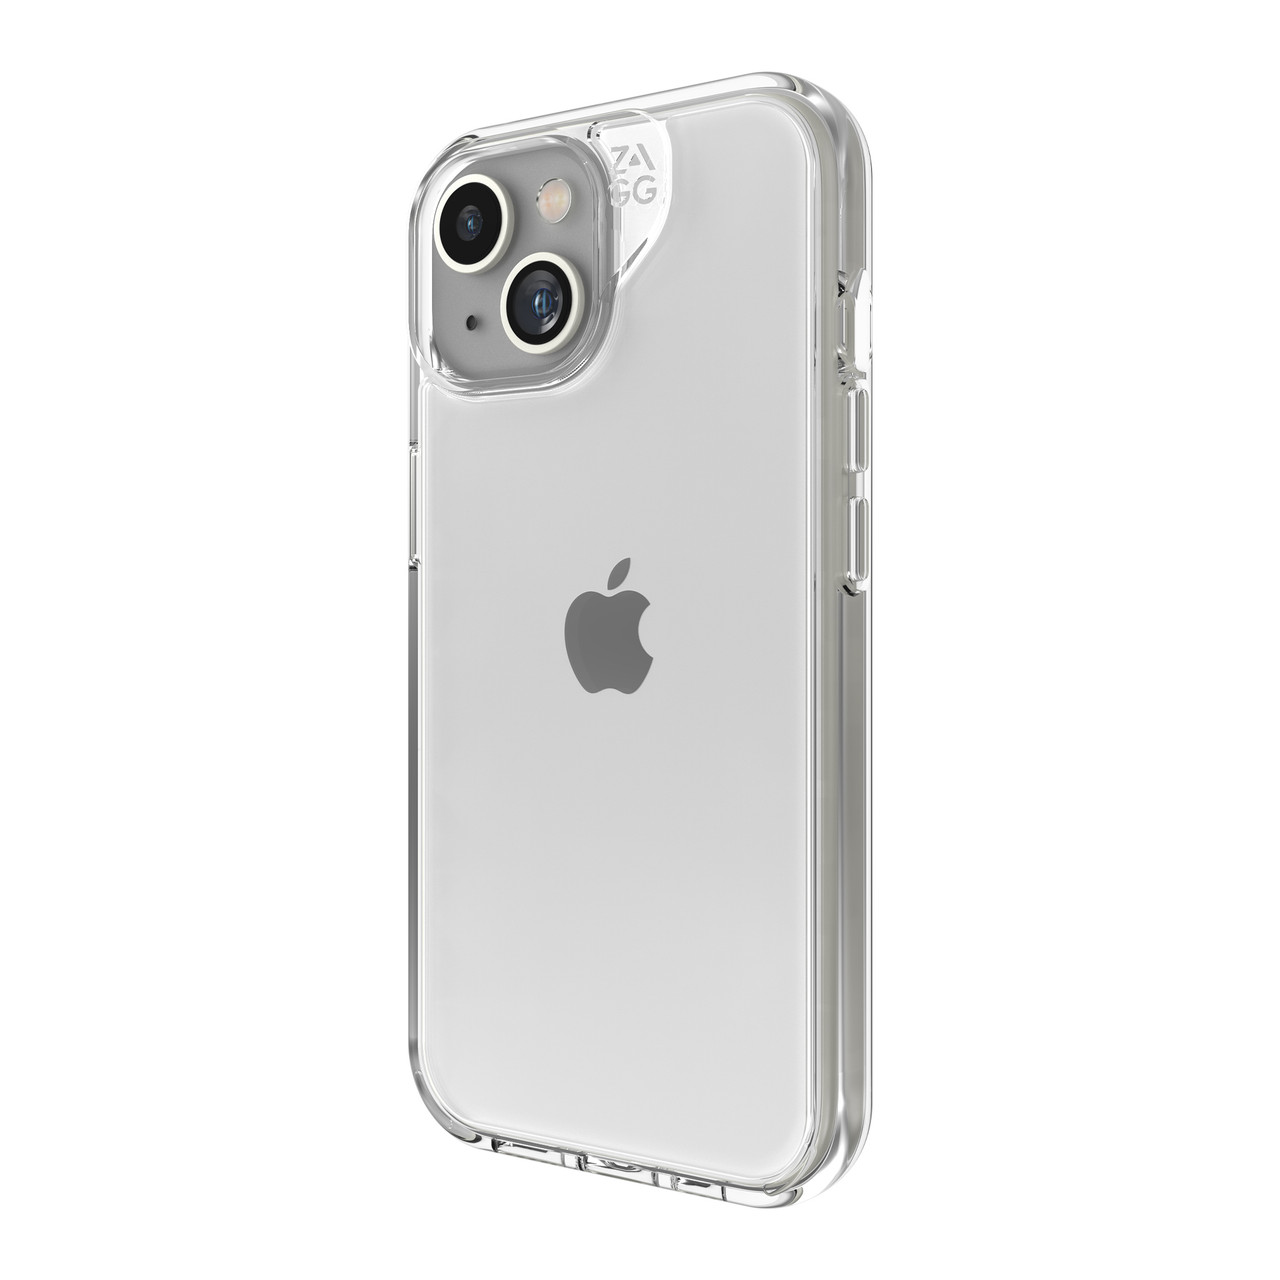 iPhone 15 Crystal Case